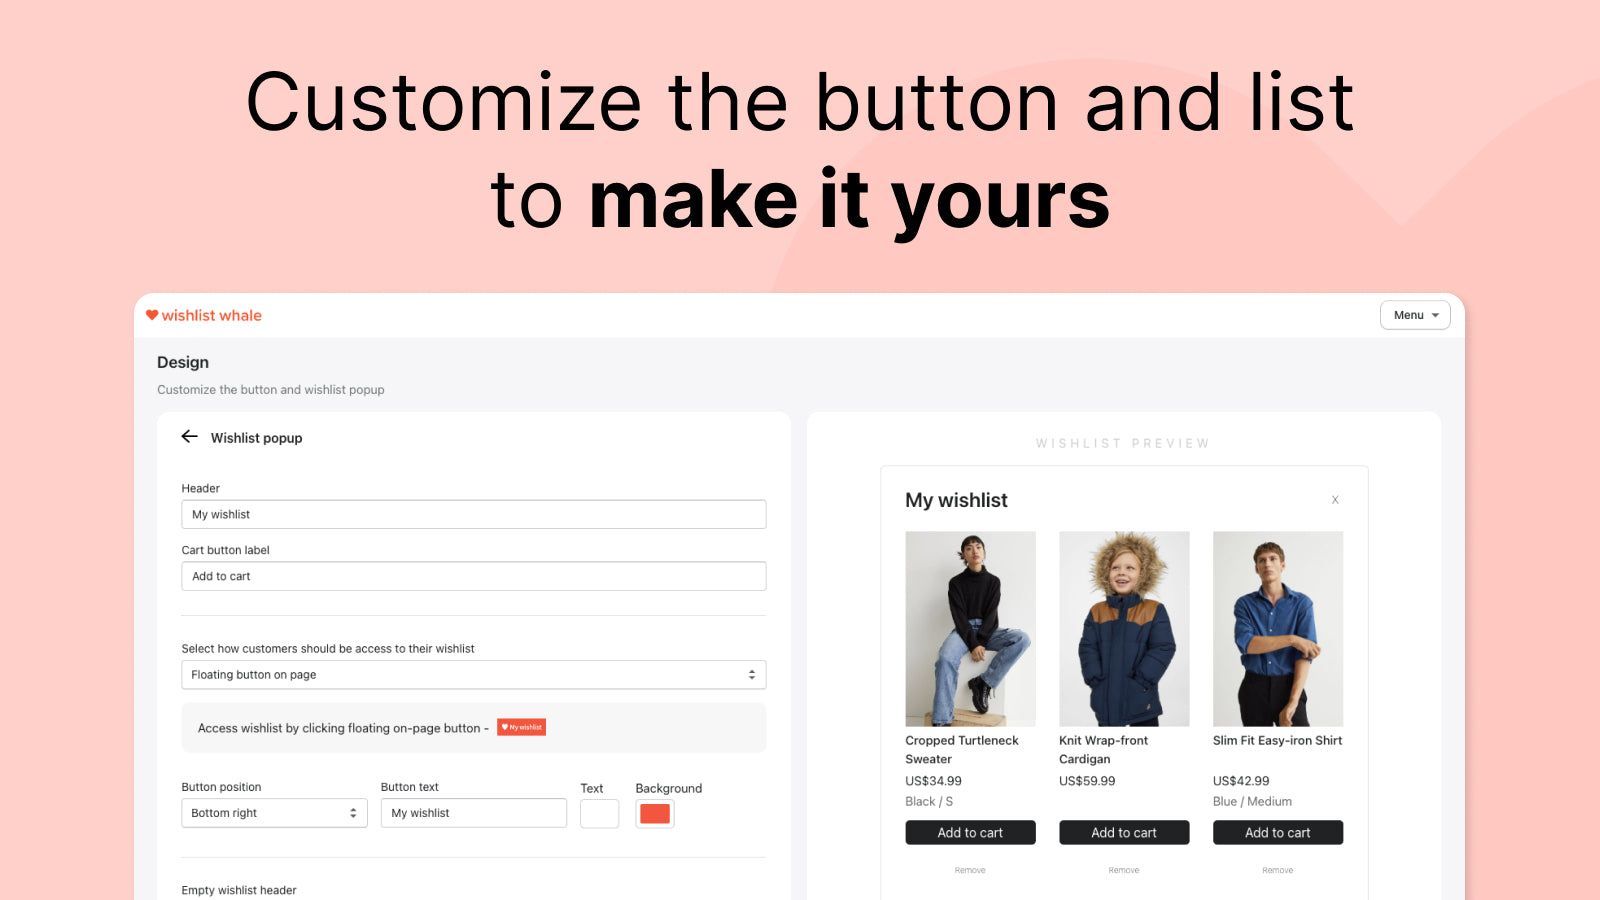 Customize the button and wishlist to make it yours